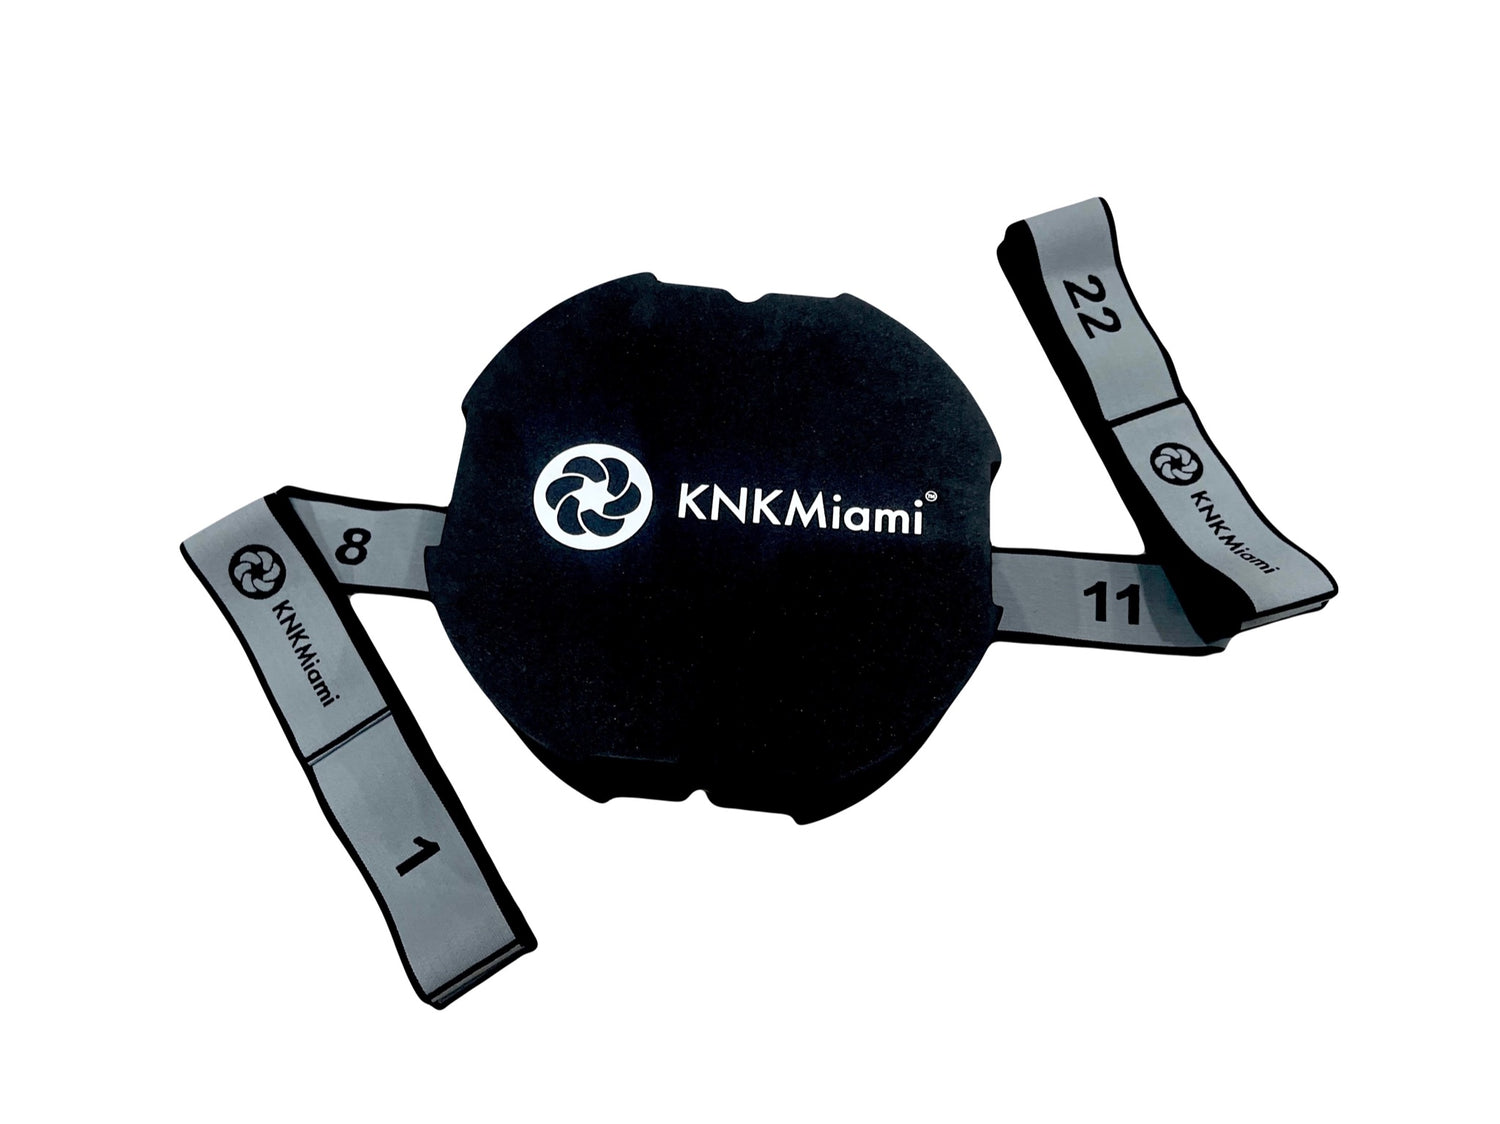 KNKMiami Stretch Band Premium 24 Loops - Light Resistance -